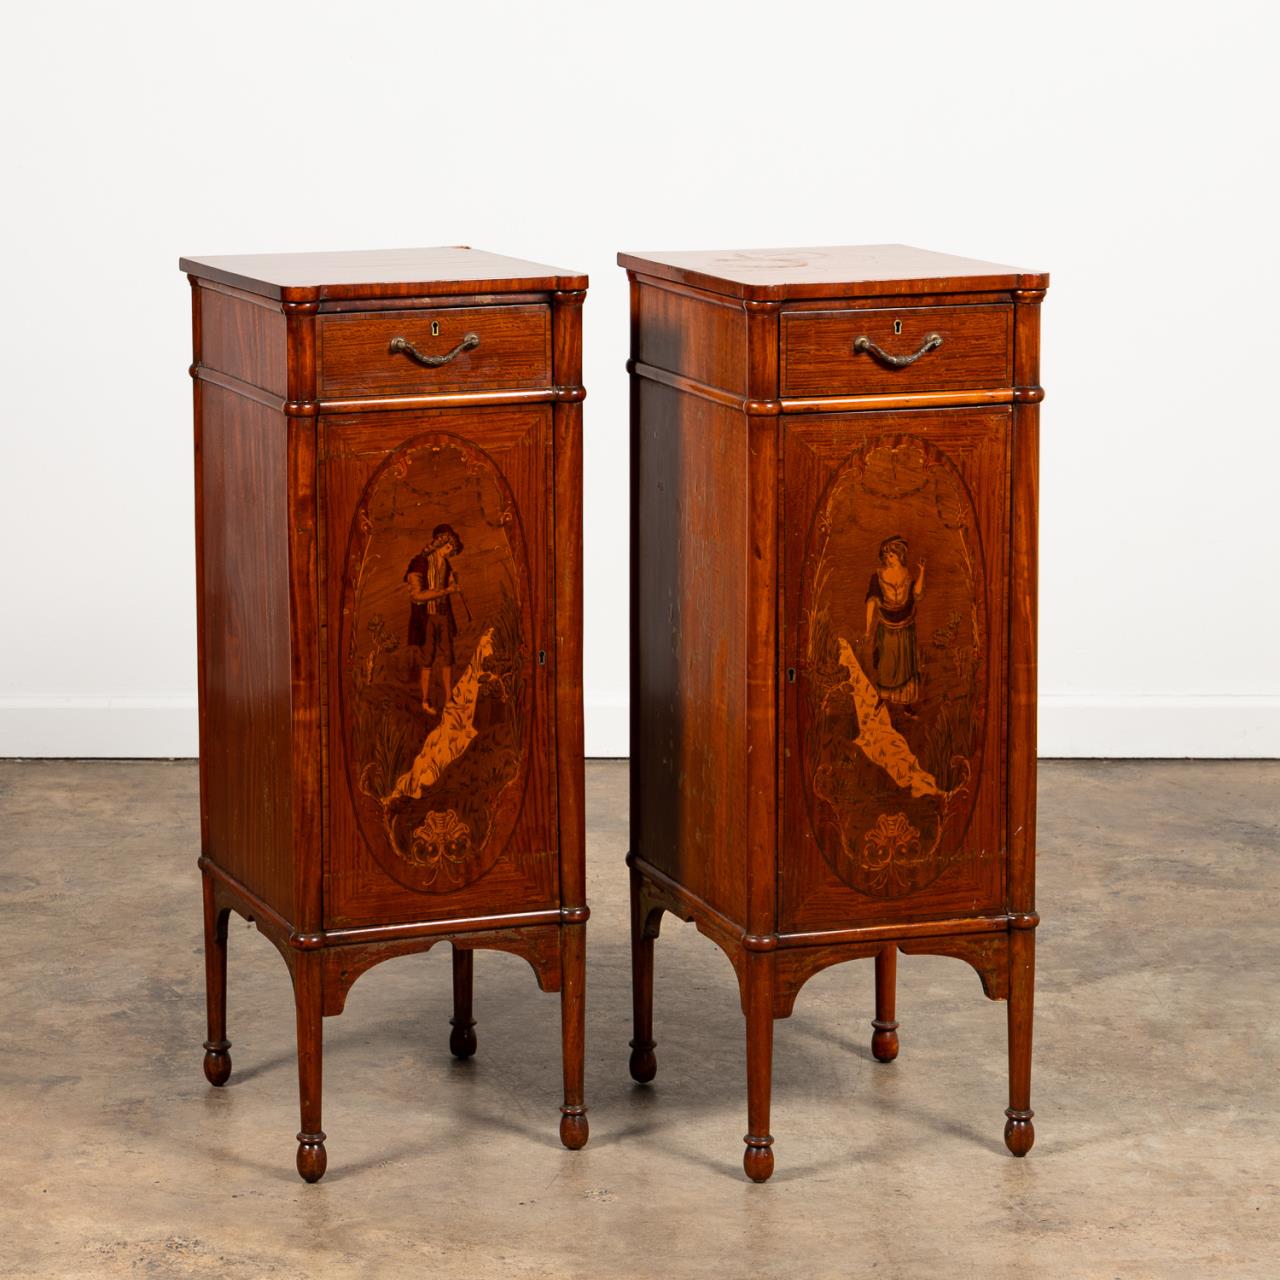 PAIR OF EDWARDIAN MARQUETRY INLAID 359aed